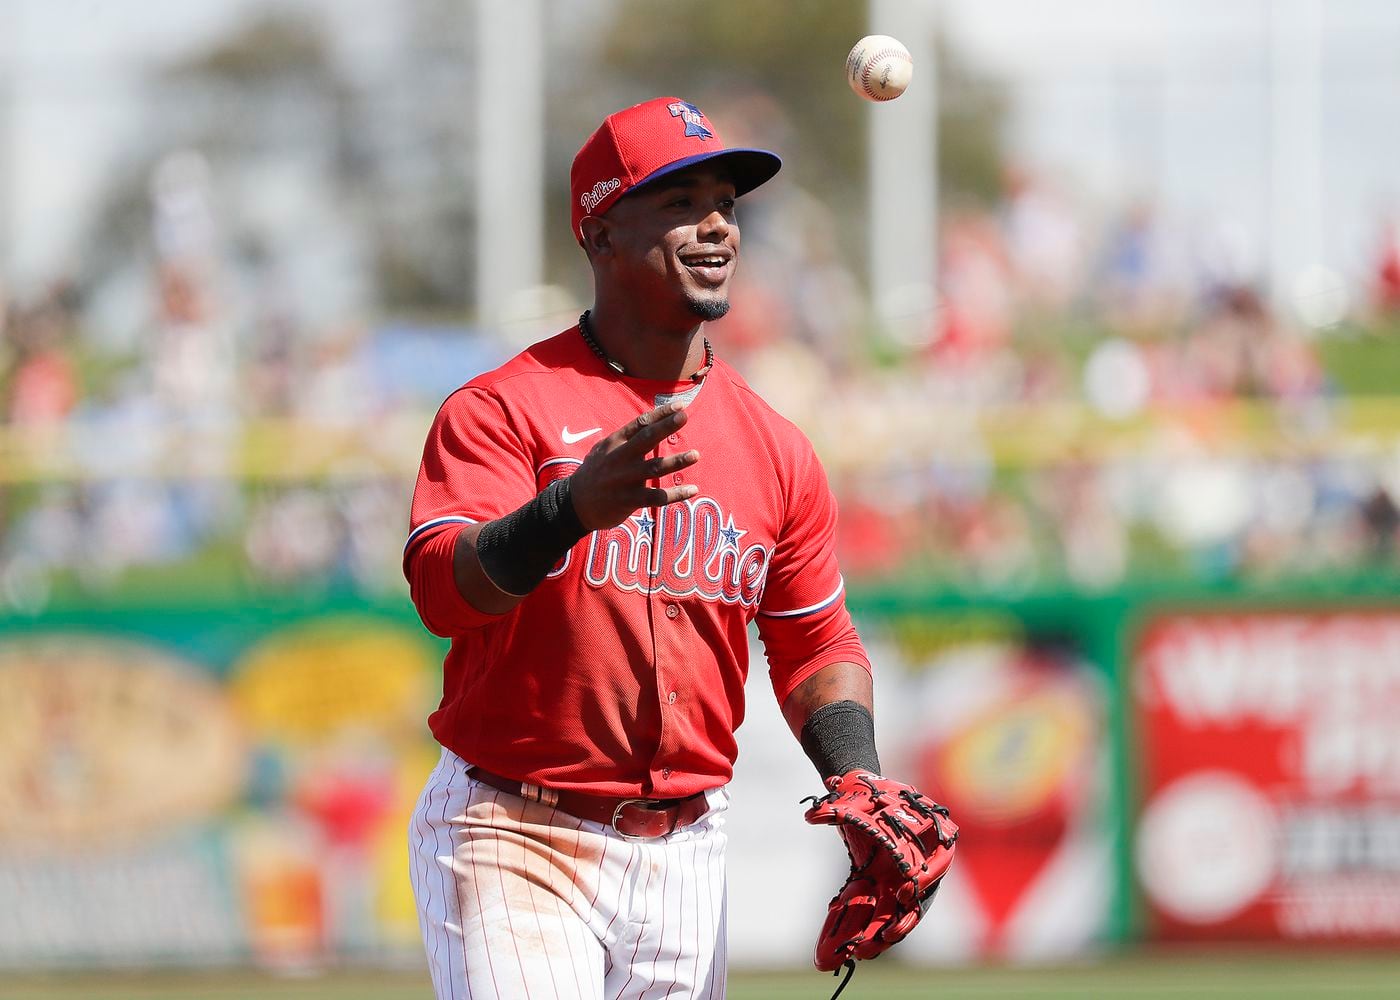 Jean Segura is looking comfortable at third base, which would allow